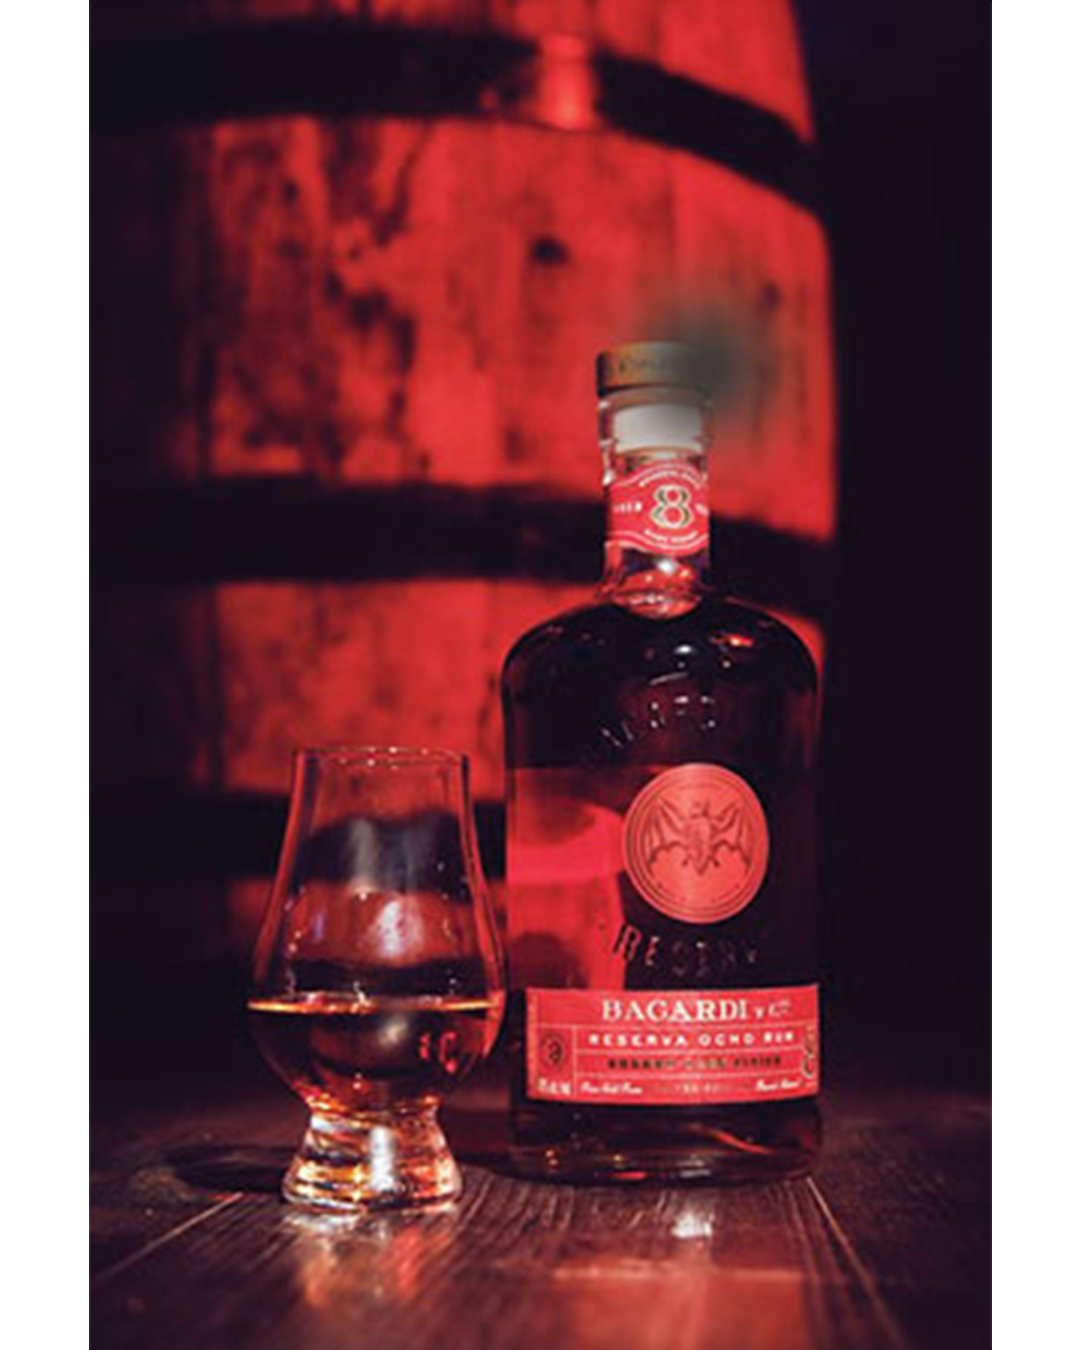 bacard-rum-launches-limited-edition-five-year-cask-finish-series-with